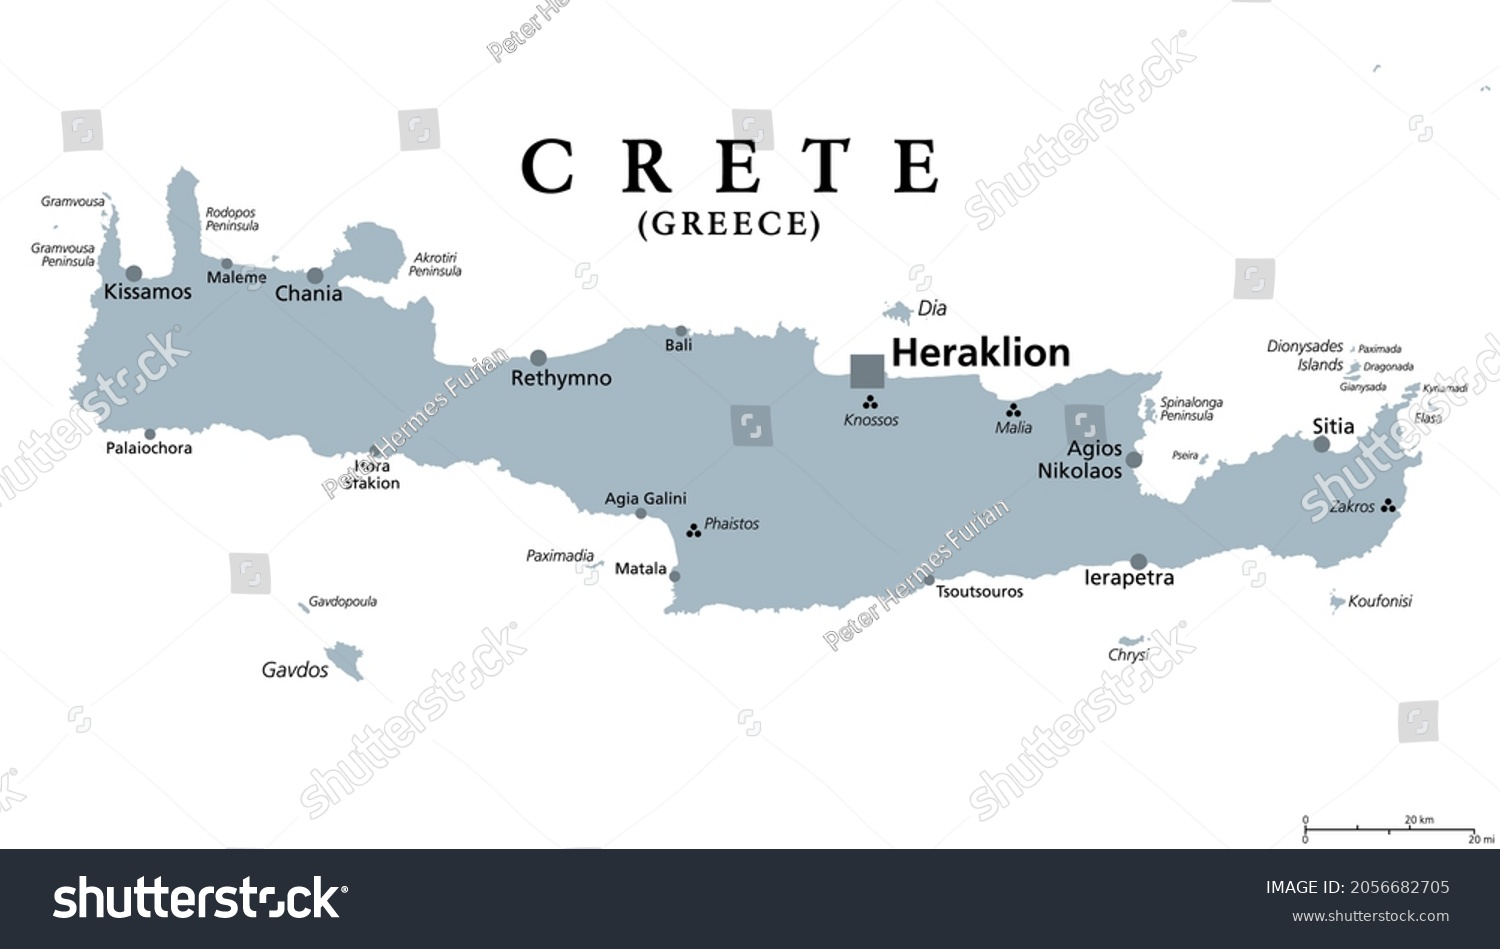 SVG of Crete, Greek island, gray political map, with capital Heraklion. Largest island of Greece and fifth largest in the Mediterranean Sea. With major Minoan settlements Knossos, Phaistos, Malia and Zakros. svg